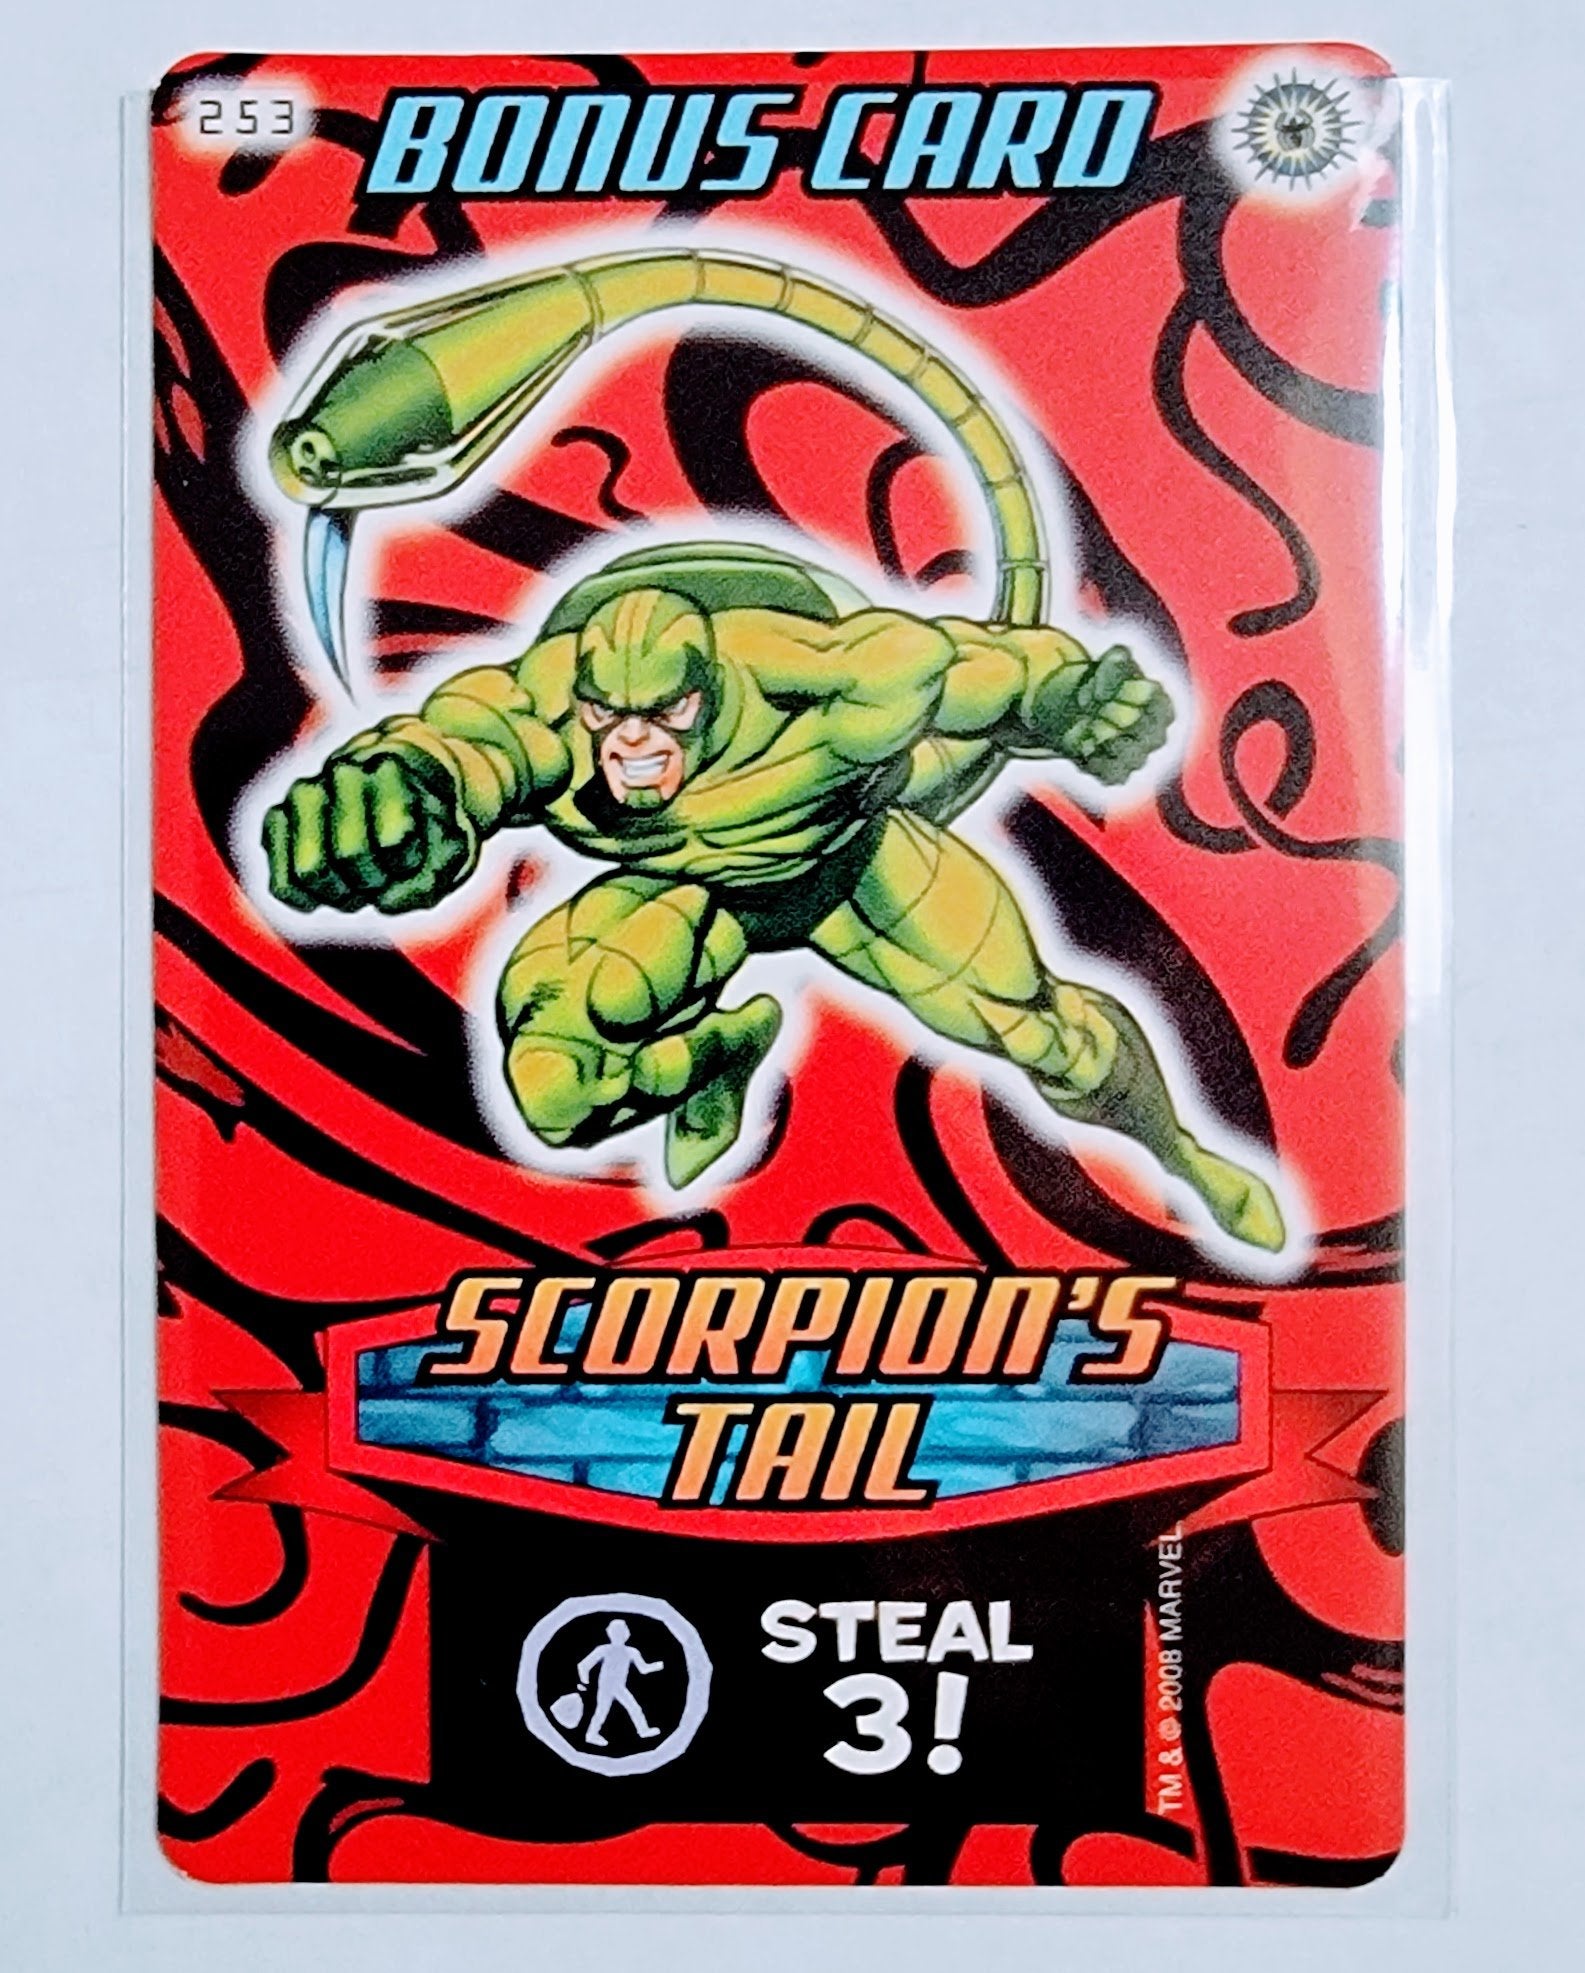 2008 Spiderman Heroes and Villians Scorpion's Tail Bonus Card #253 Marvel Booster Trading Card UPTI simple Xclusive Collectibles   